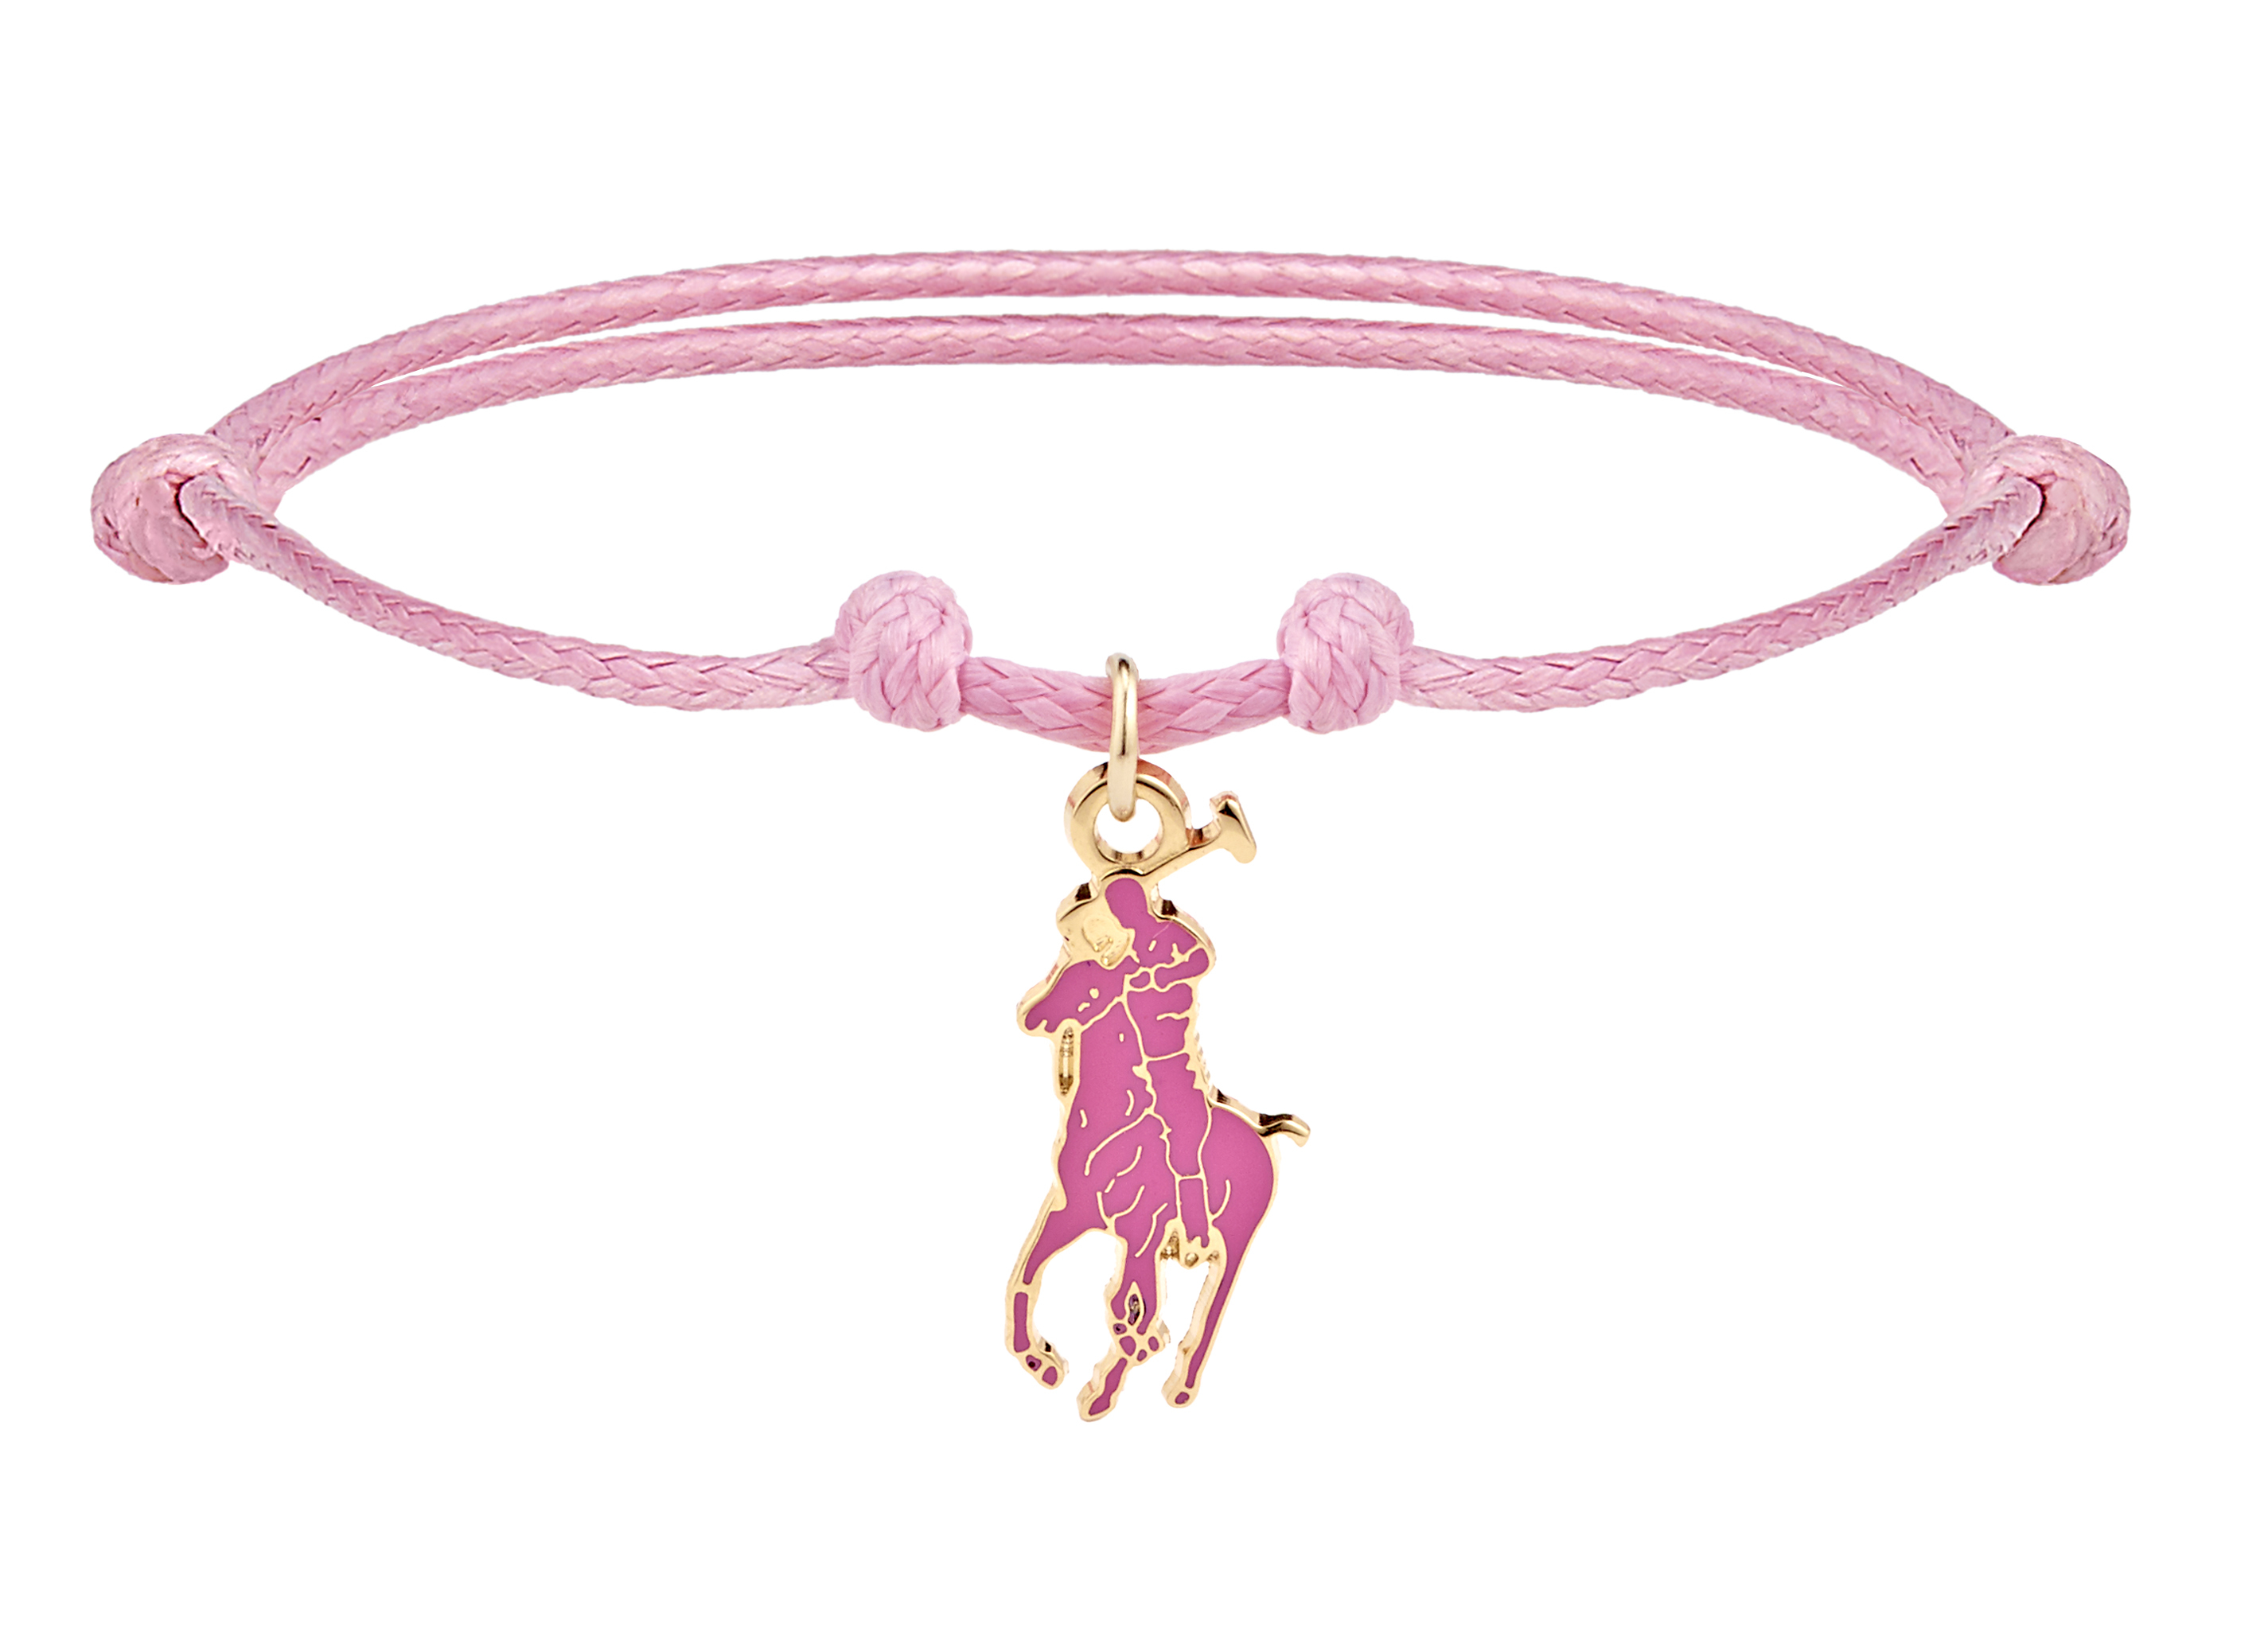 Ralph Lauren's Pink Pony Initiative Marks 22 Years in the Fight Against  Cancer - A&E Magazine